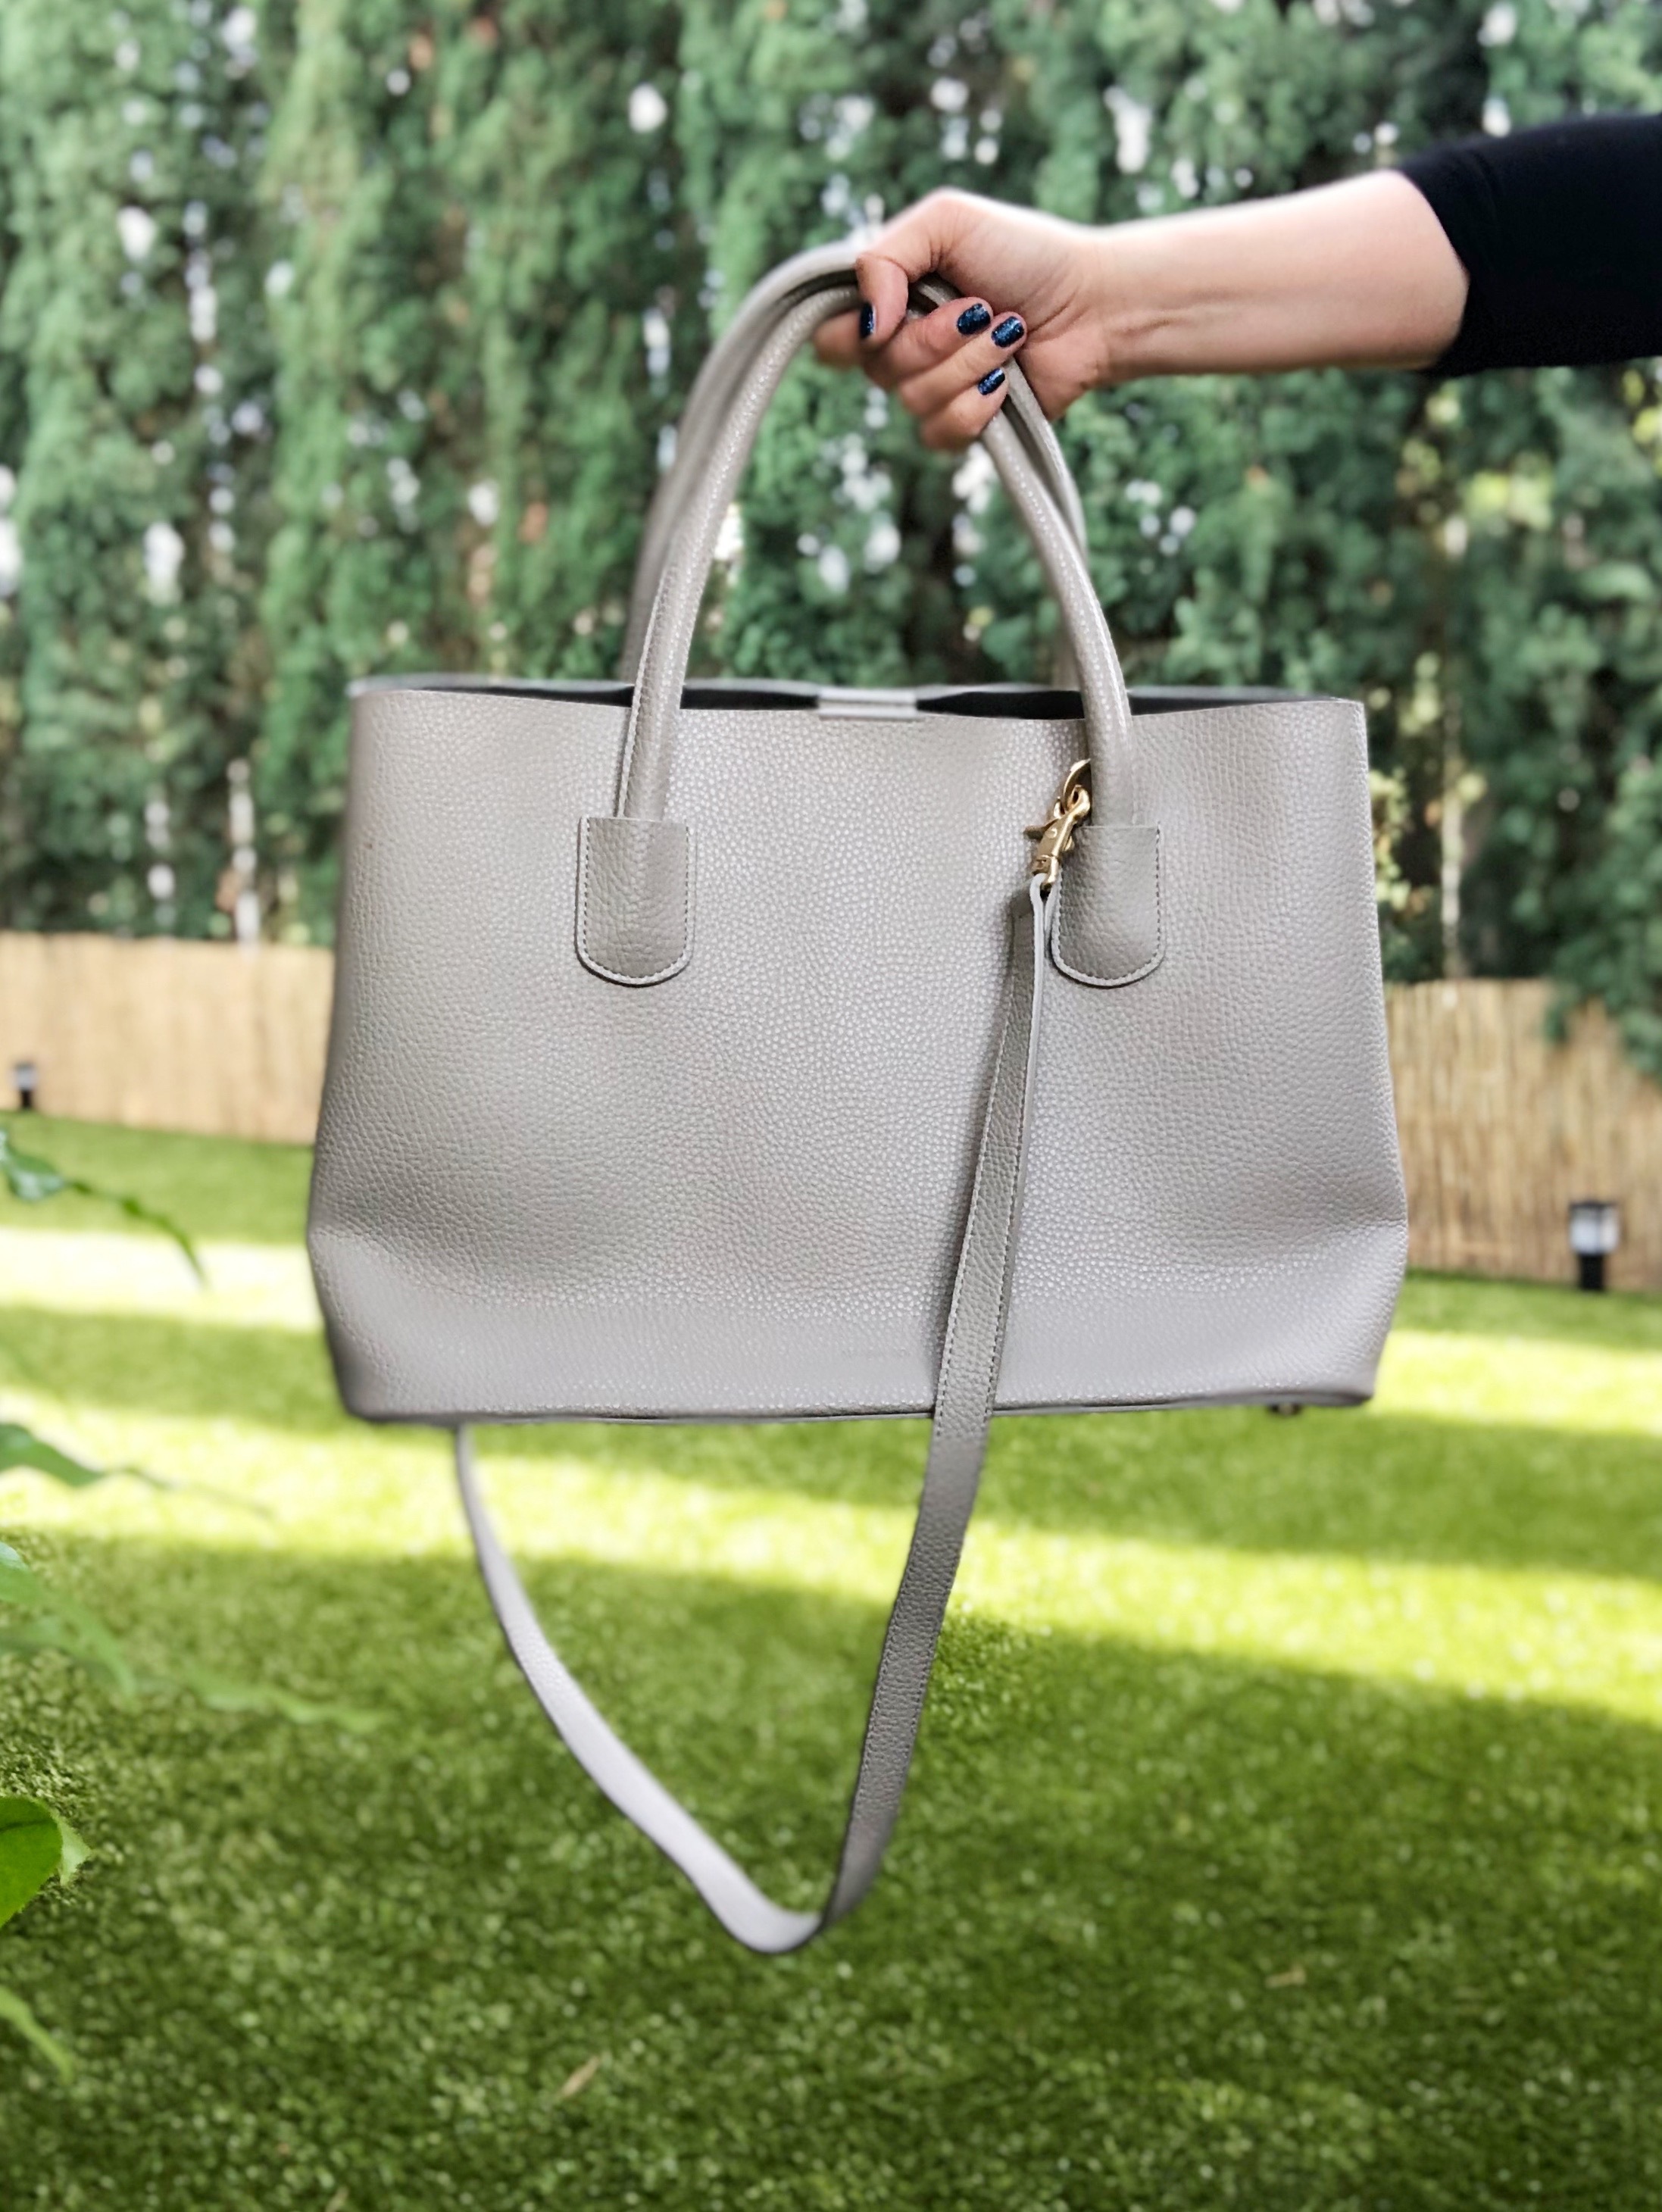 Cher Tote in Light Grey | Angela Roi | Ethica by Angela · Roi